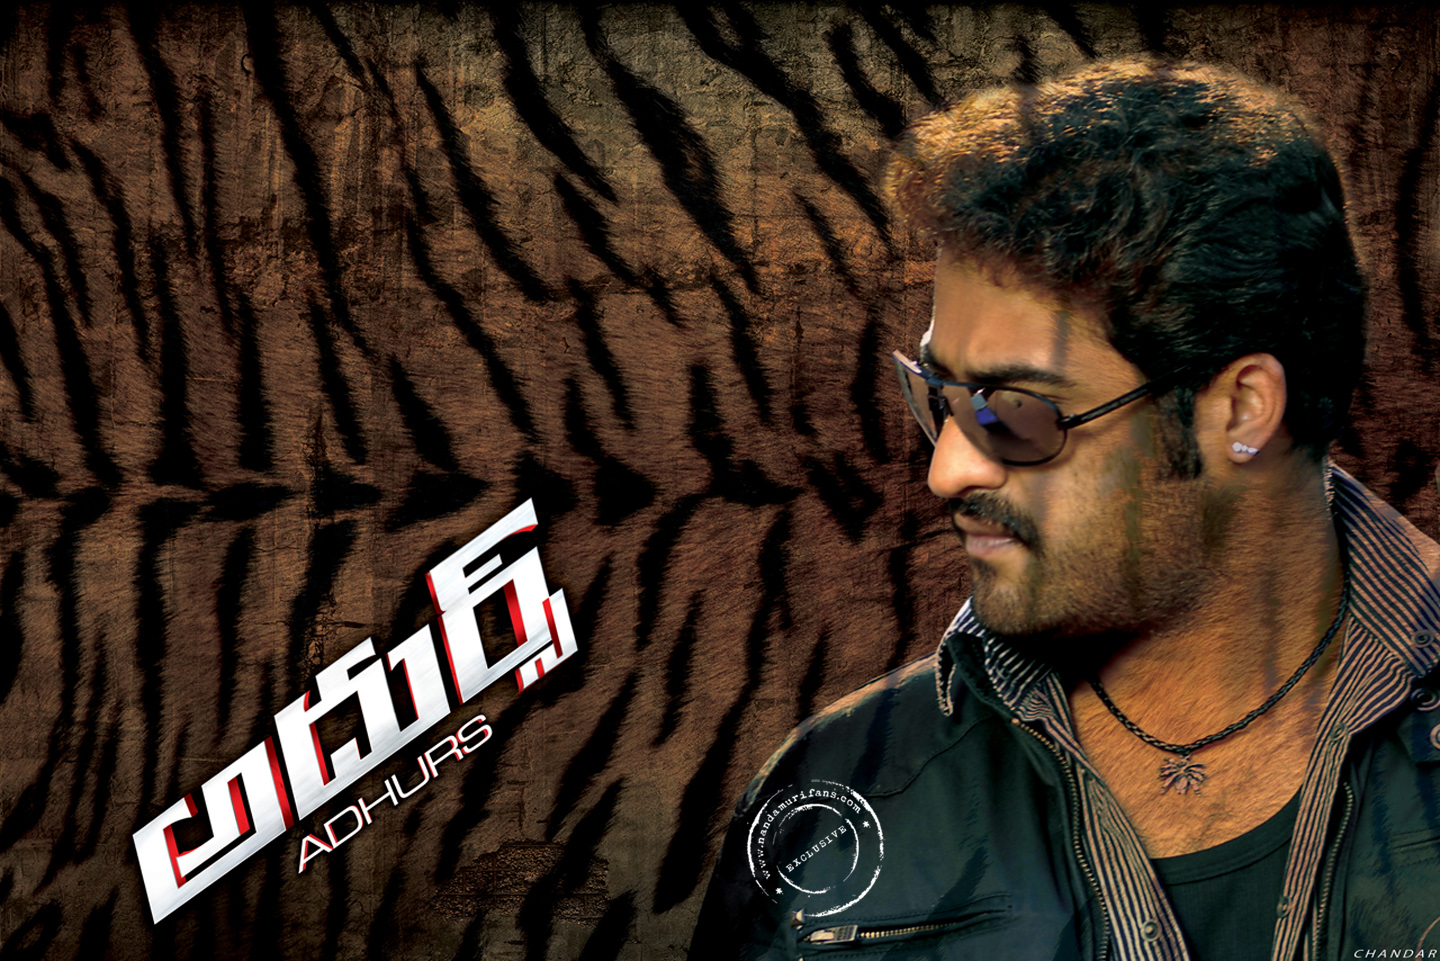 http://www.nandamurifans.com/wallpapers/images/wallpapers/Adhurs_CW01a-388848.jpeg